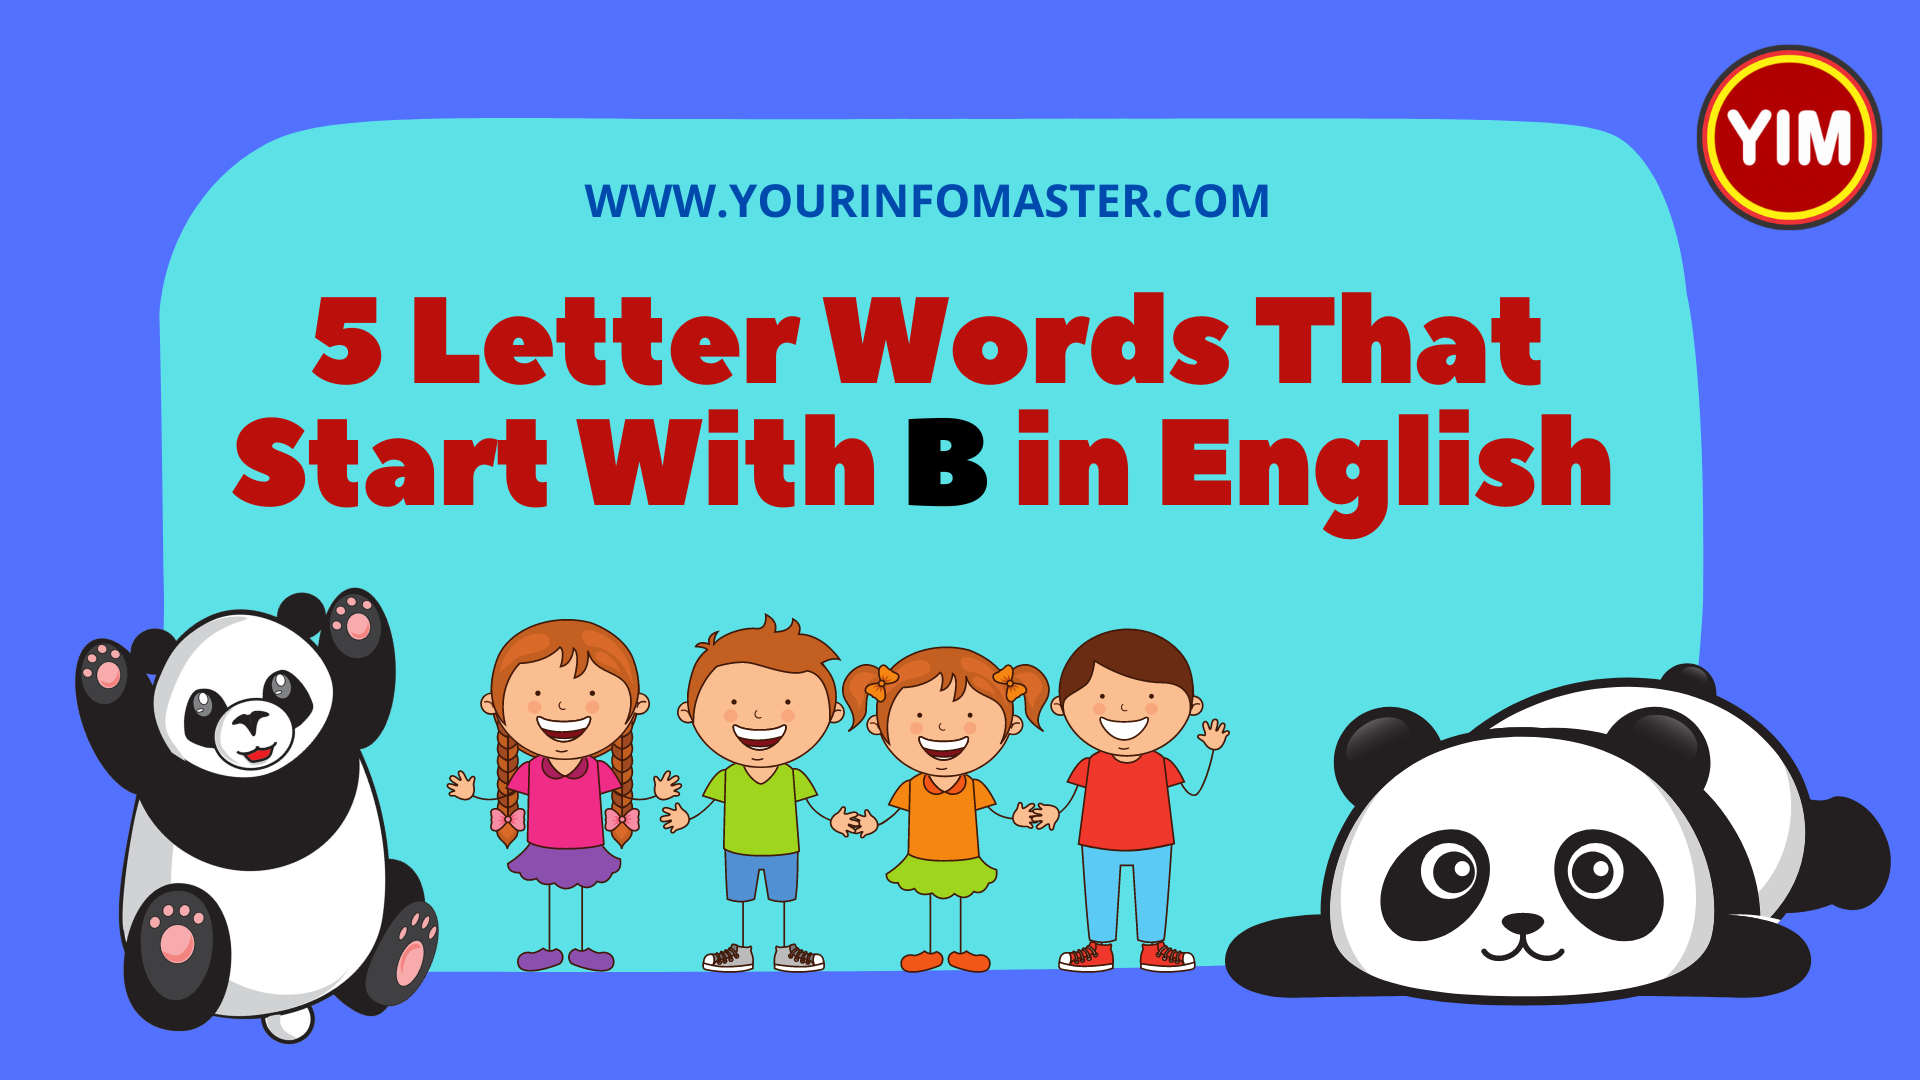 5 Letter B Words, 5 letter words, 5 letter words that start with b, 5 Letter Words With B, b words, English, English Grammar, English Vocabulary, english words, List of 5 Letter Words, Vocabulary, Words That Start with b